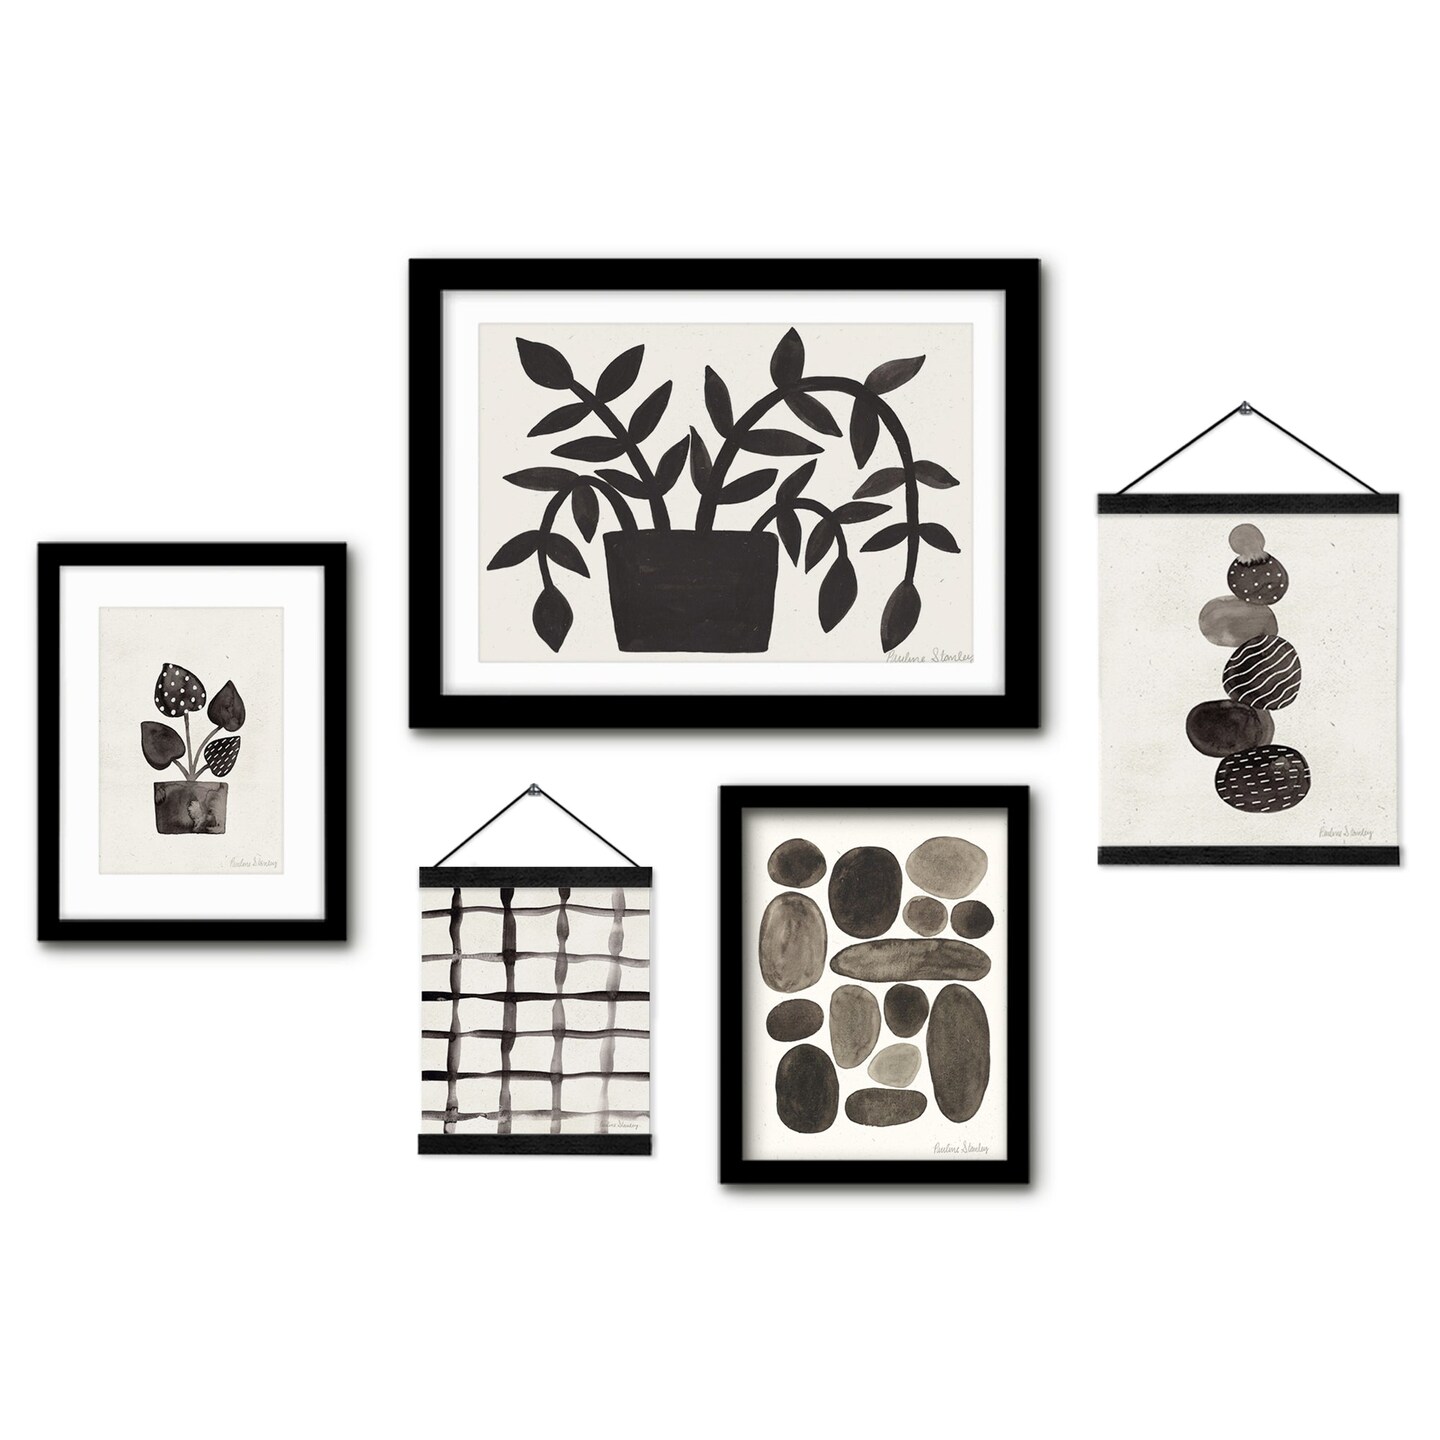 (Set of 5) Framed Multimedia Gallery Wall Art Set - Hot Stones and Houseplants